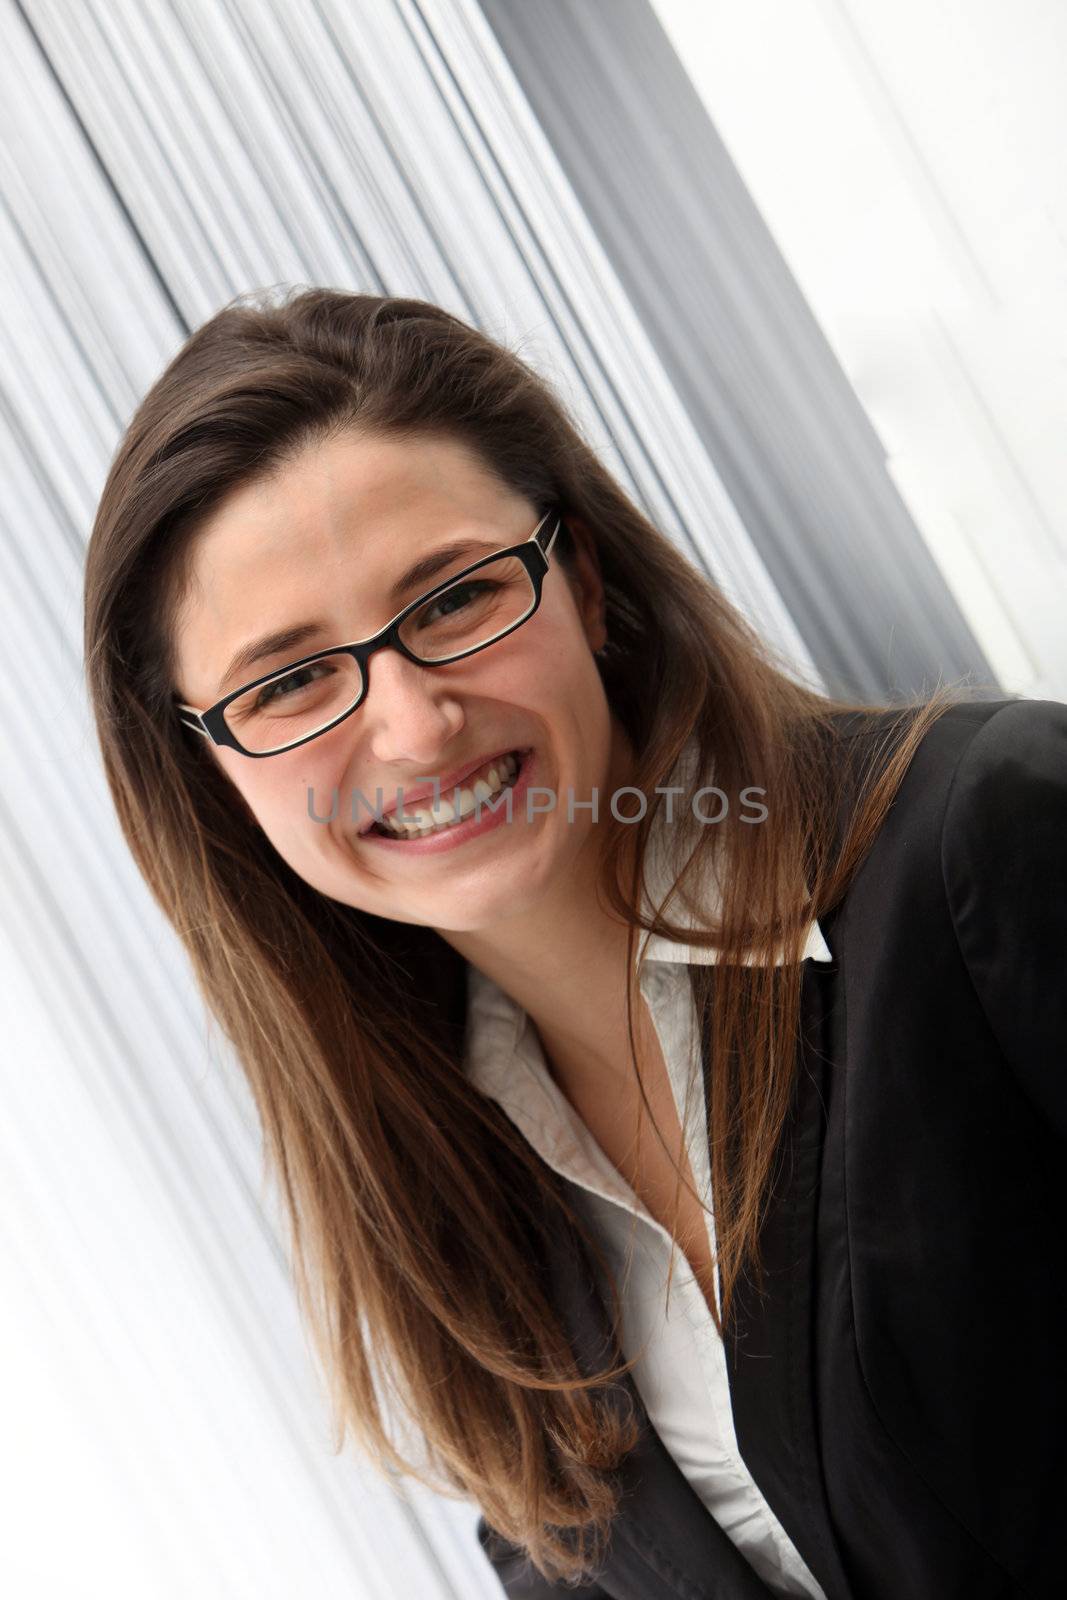 Smiling young professional woman in glasses looking into the camera, angled studio portrait